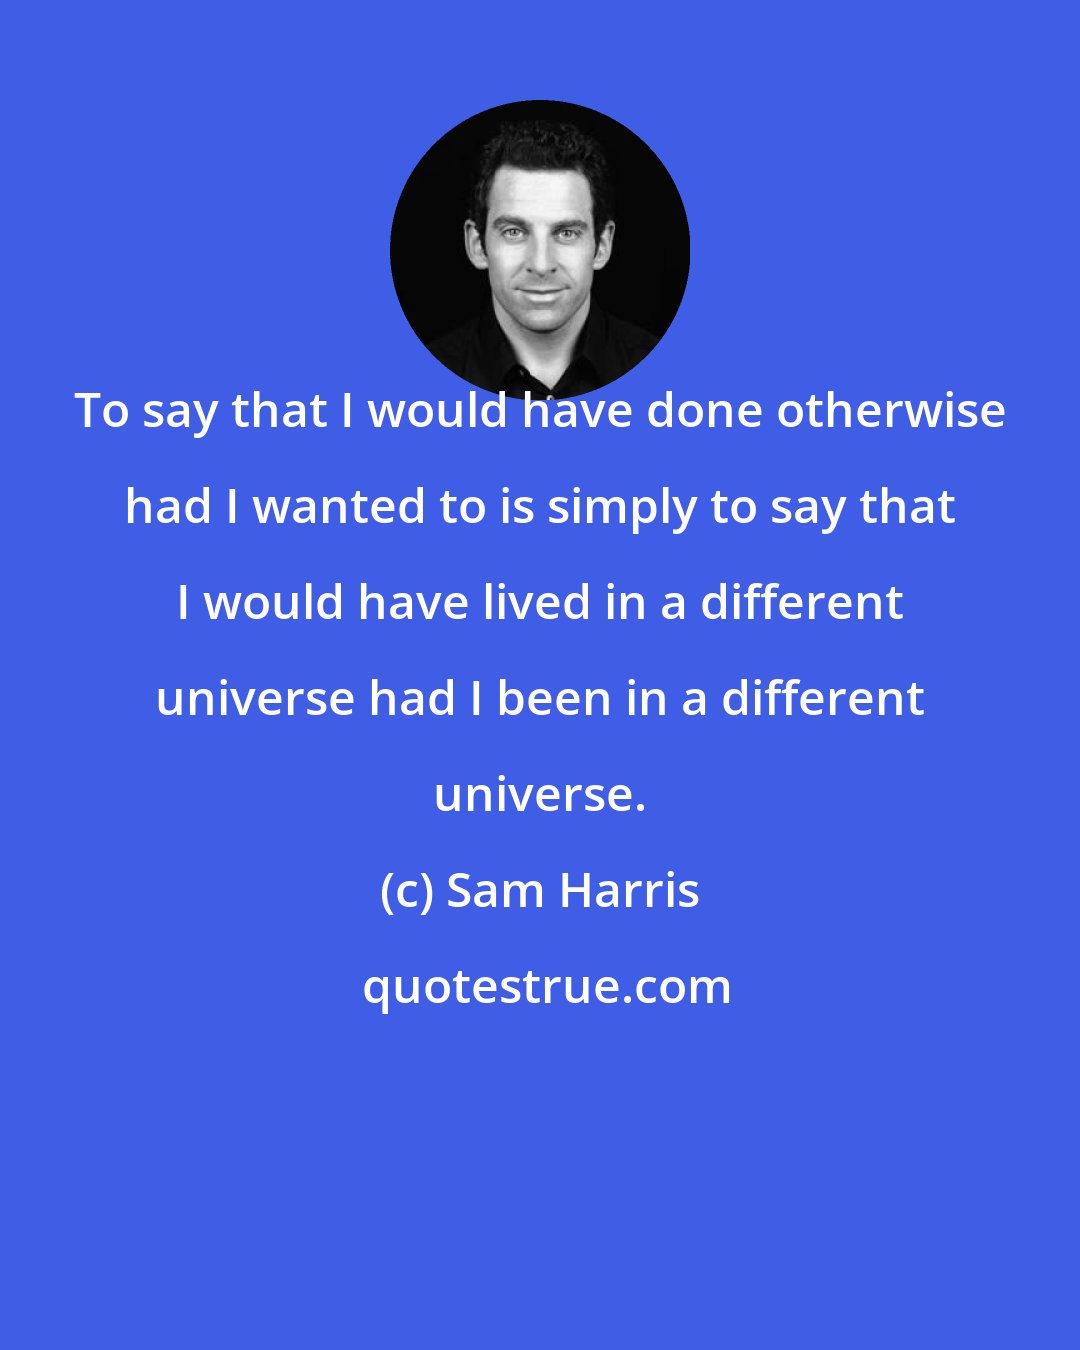 Sam Harris: To say that I would have done otherwise had I wanted to is simply to say that I would have lived in a different universe had I been in a different universe.